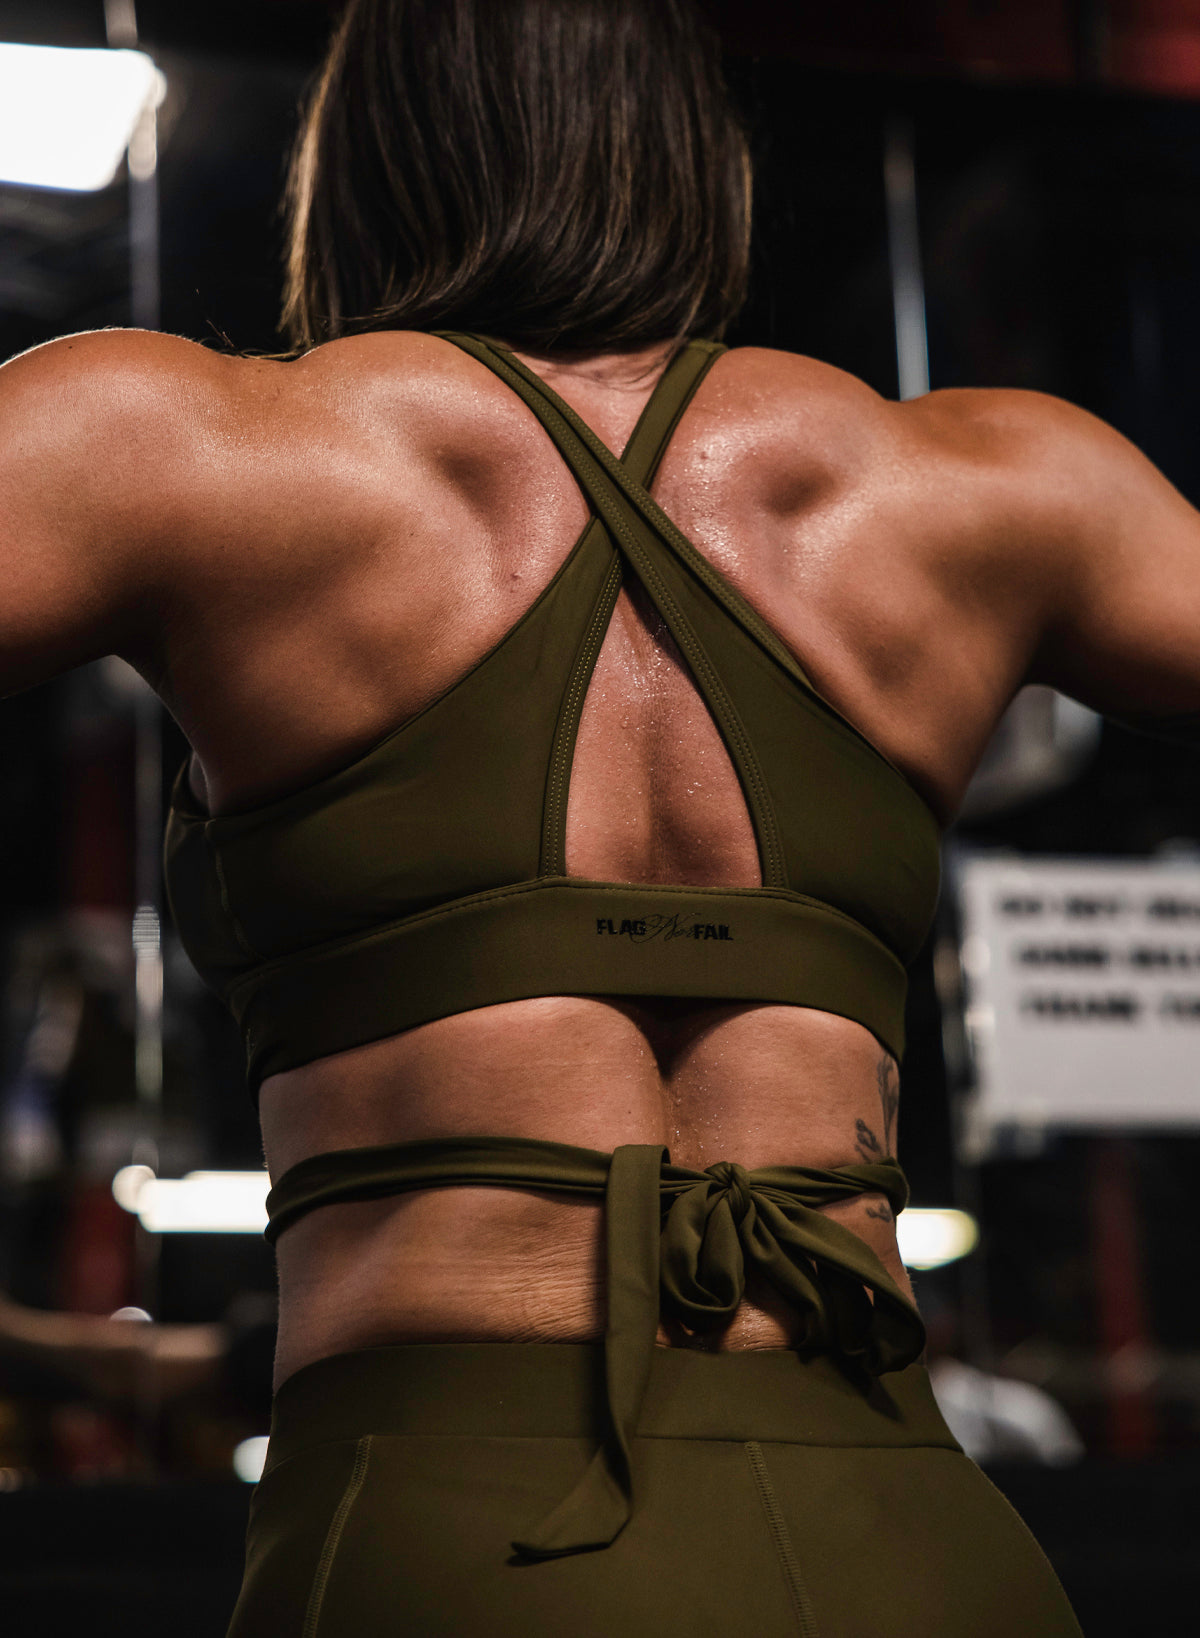 P.E Nation Fast Lane Sports Bra In Burnt Olive at Storm Fashion